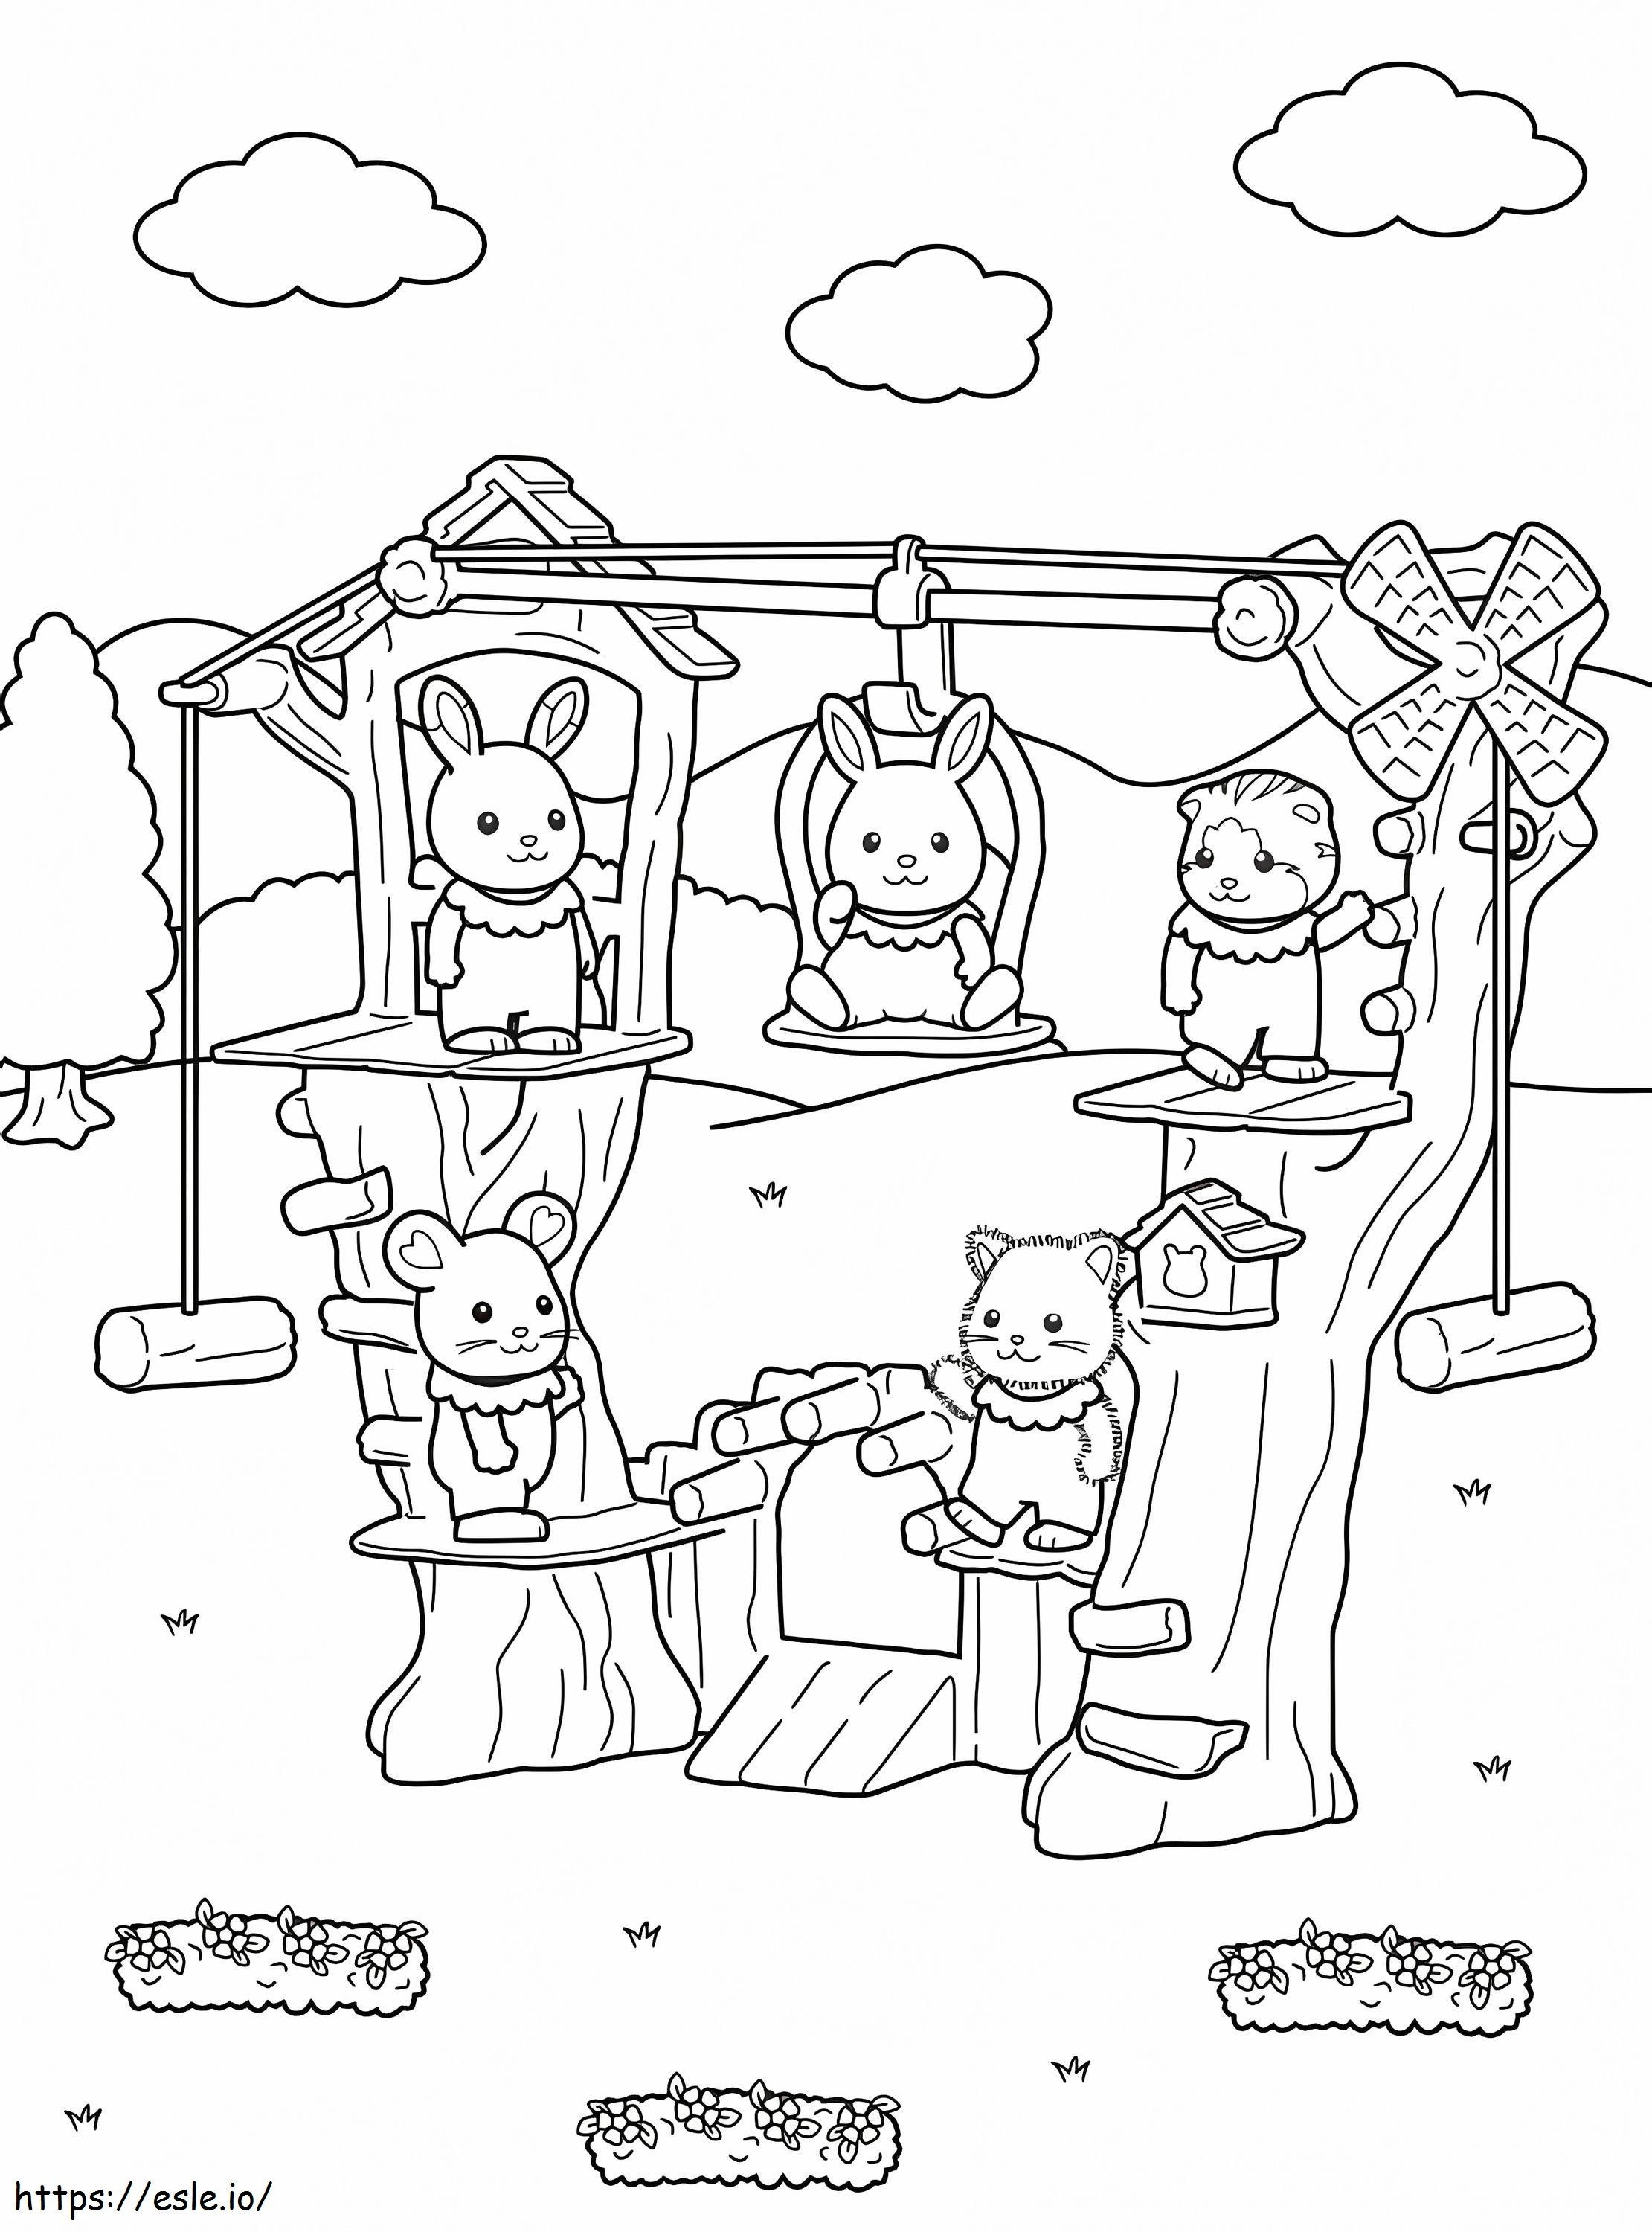 Sylvanian Families 8 coloring page